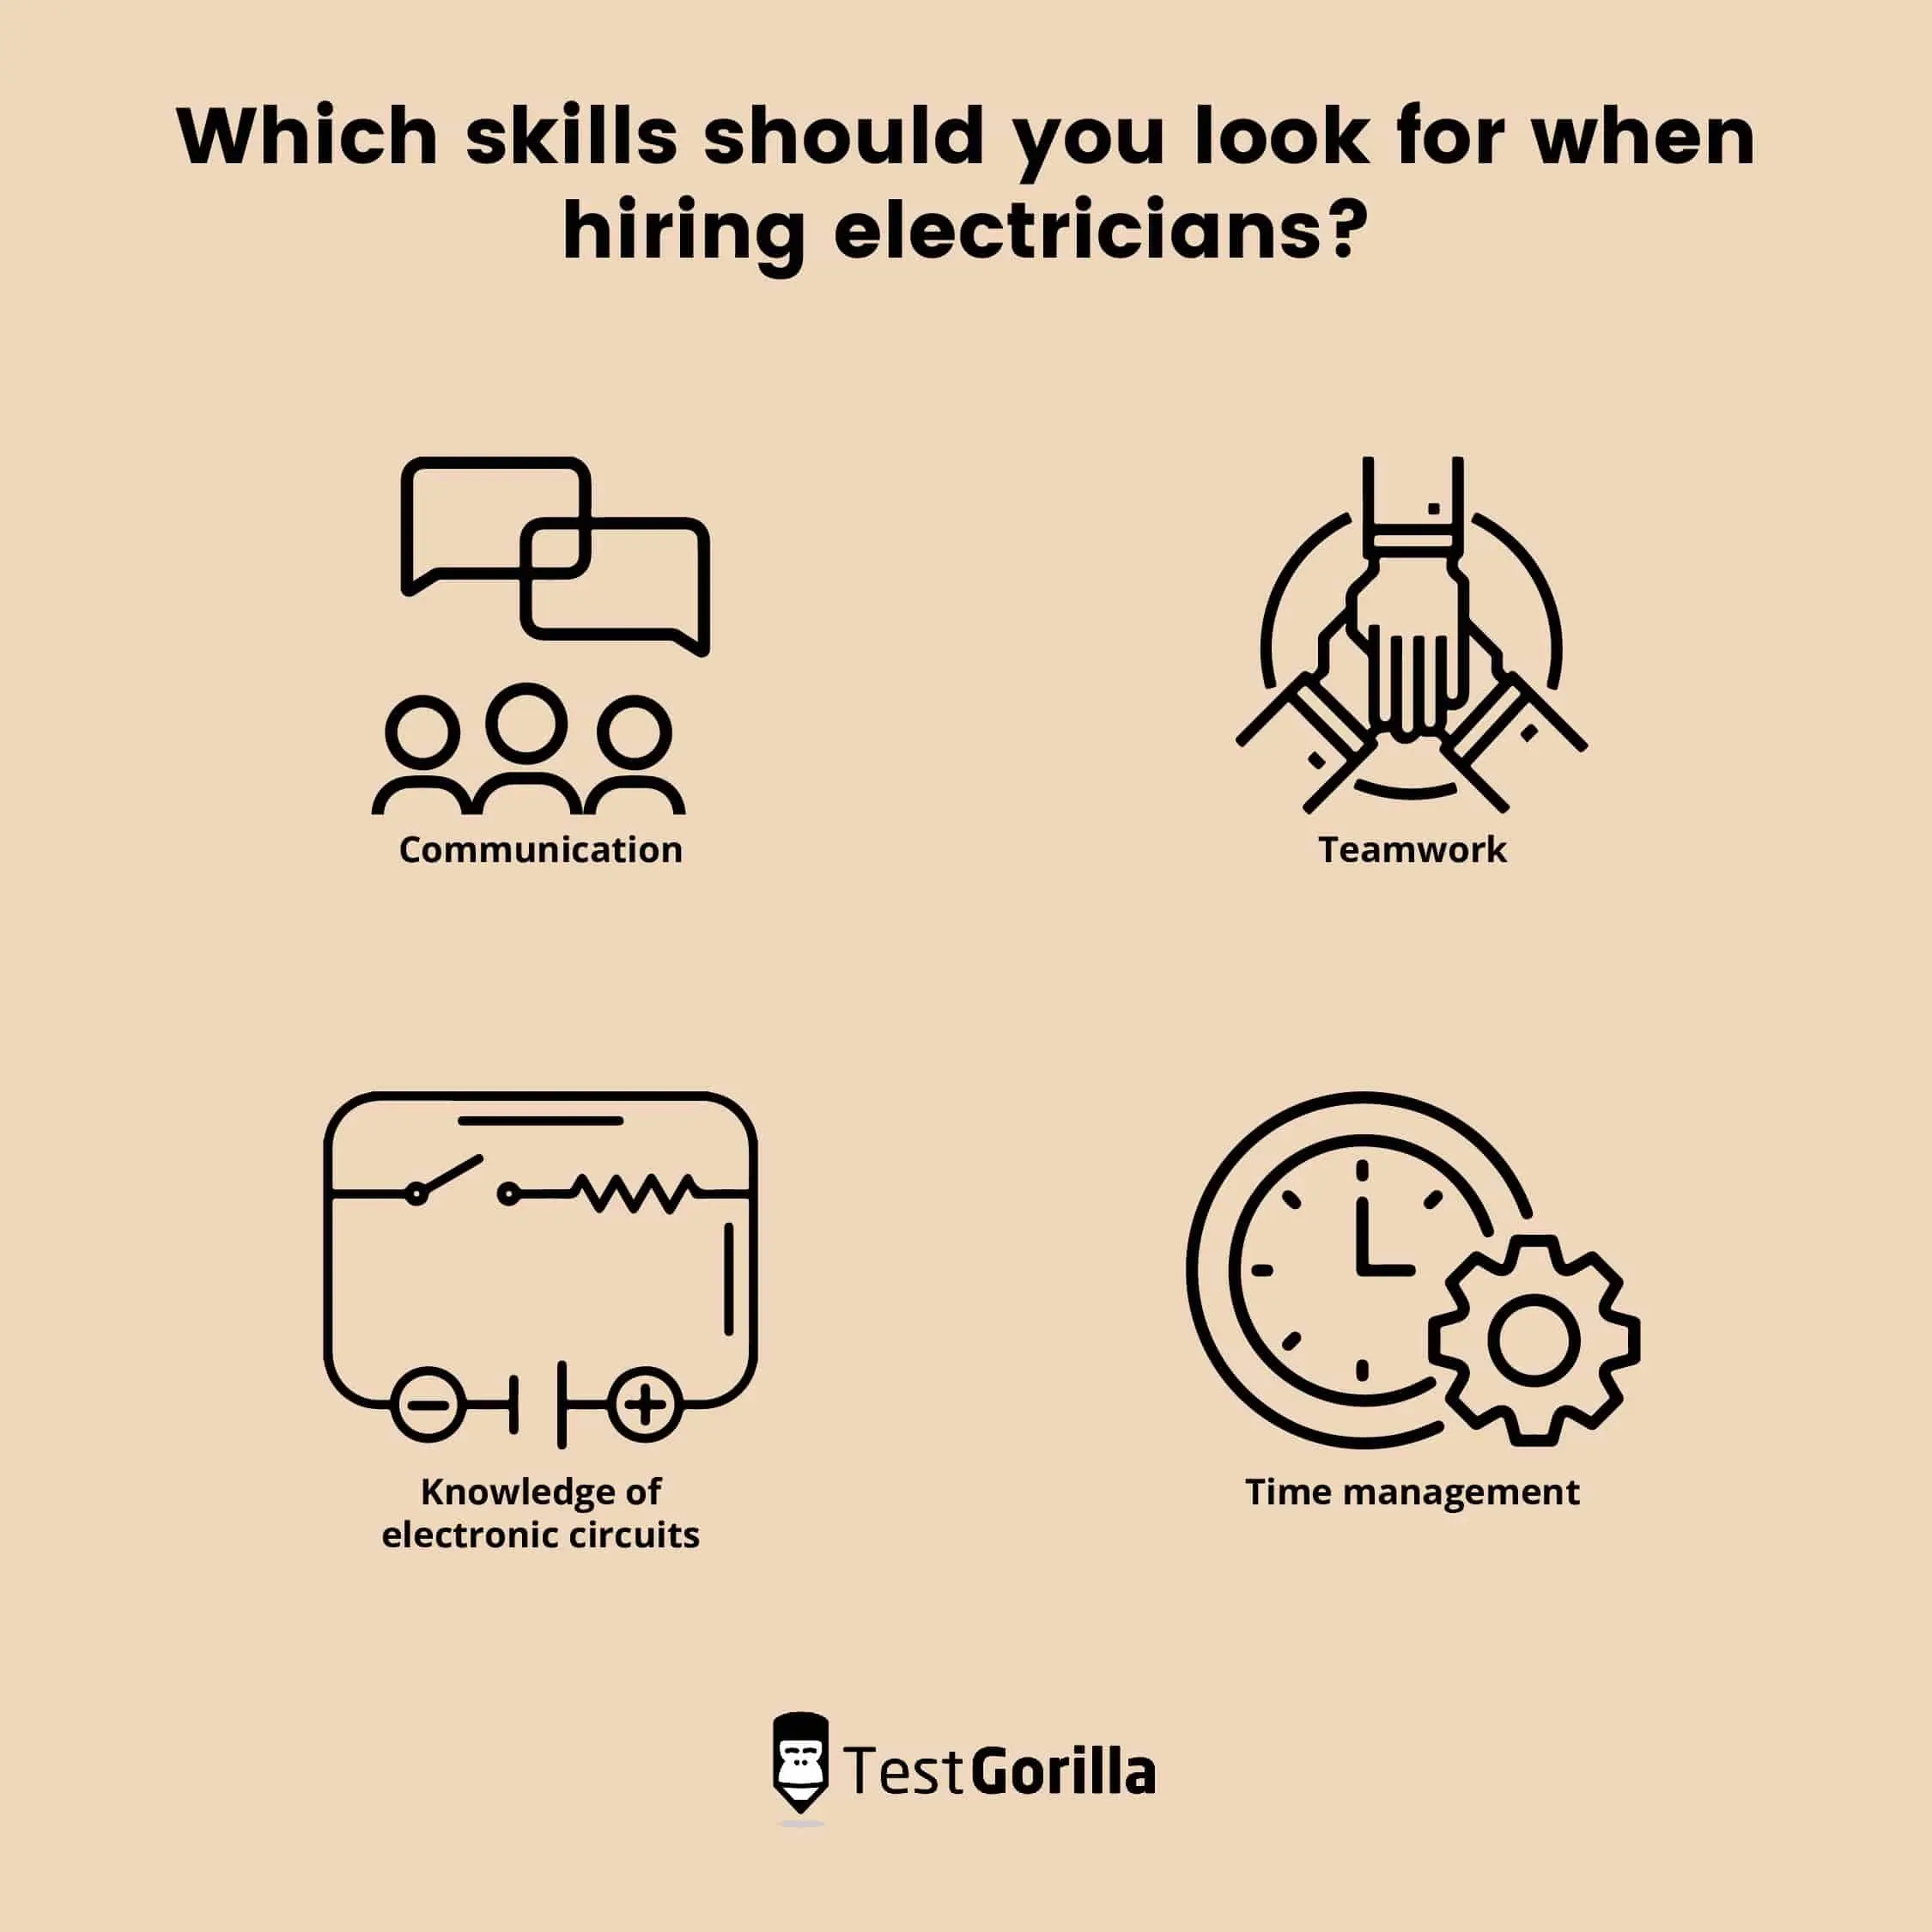 image showing the skills you should you look for when hiring electricians